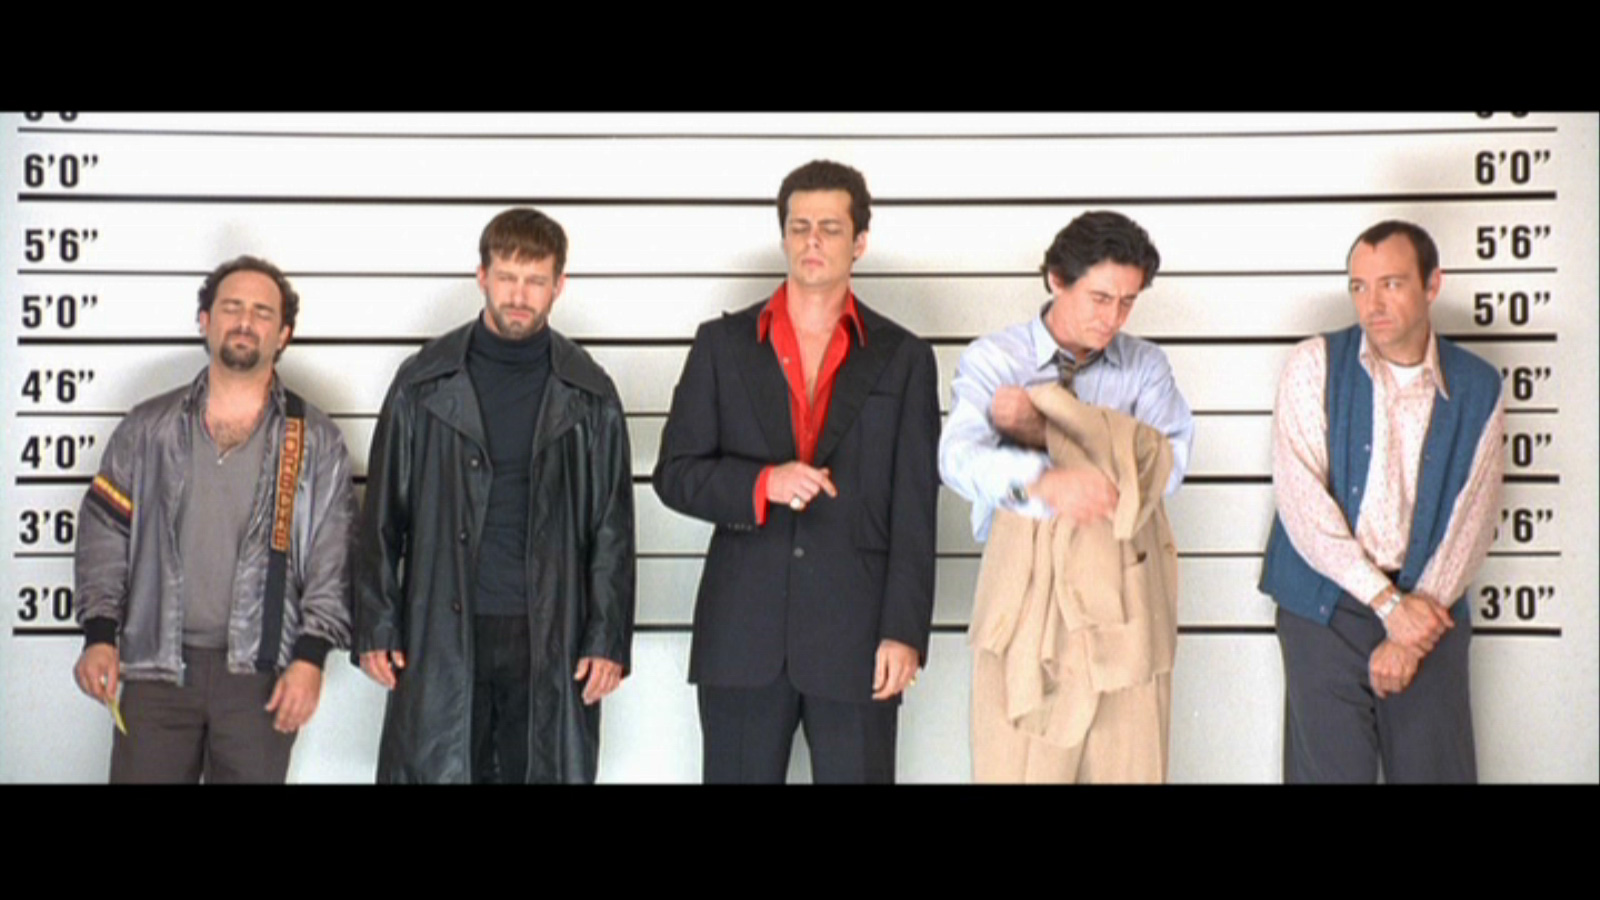 Movie Quote of the Day / The Usual Suspects - The Devil's Greatest